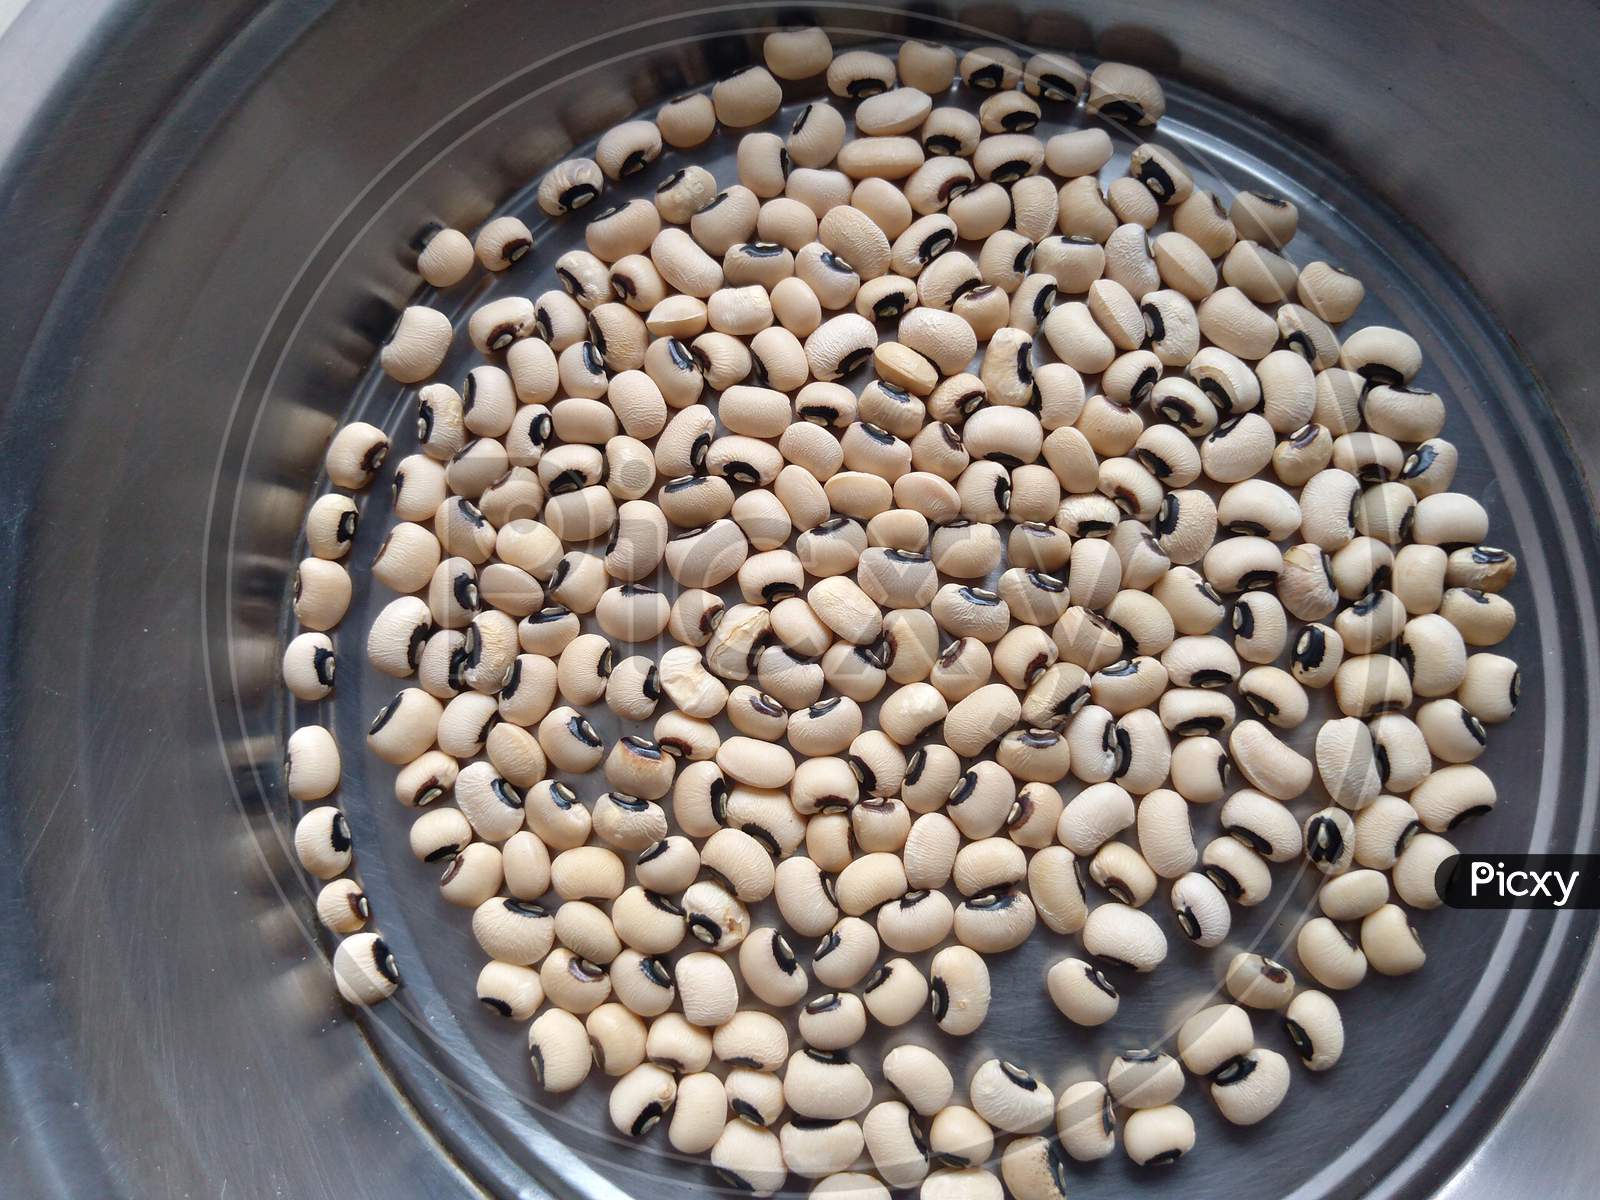 Black eyed peas is placed in a stainless steel plate. Grain